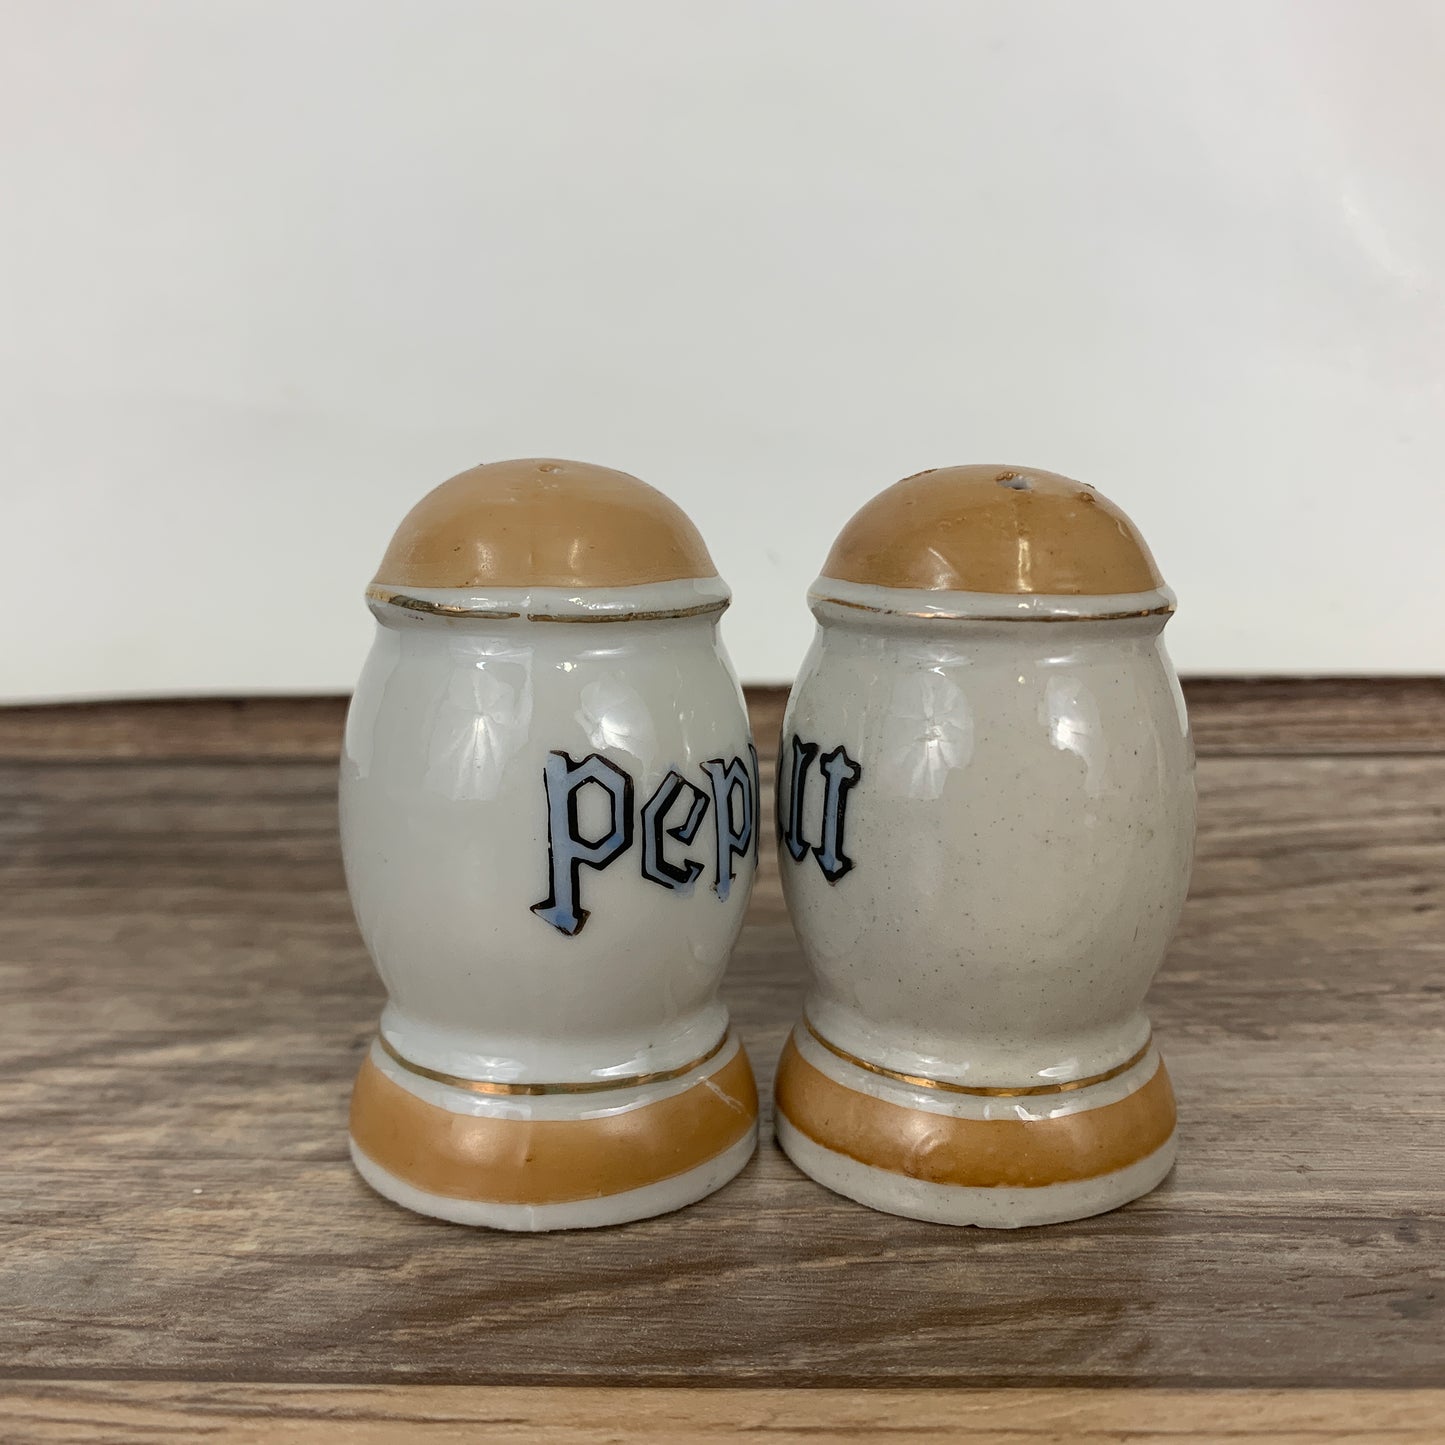 Vintage Salt and Pepper Shakers Stein Shaped with Tray, Made in Japan Vintage Ceramics